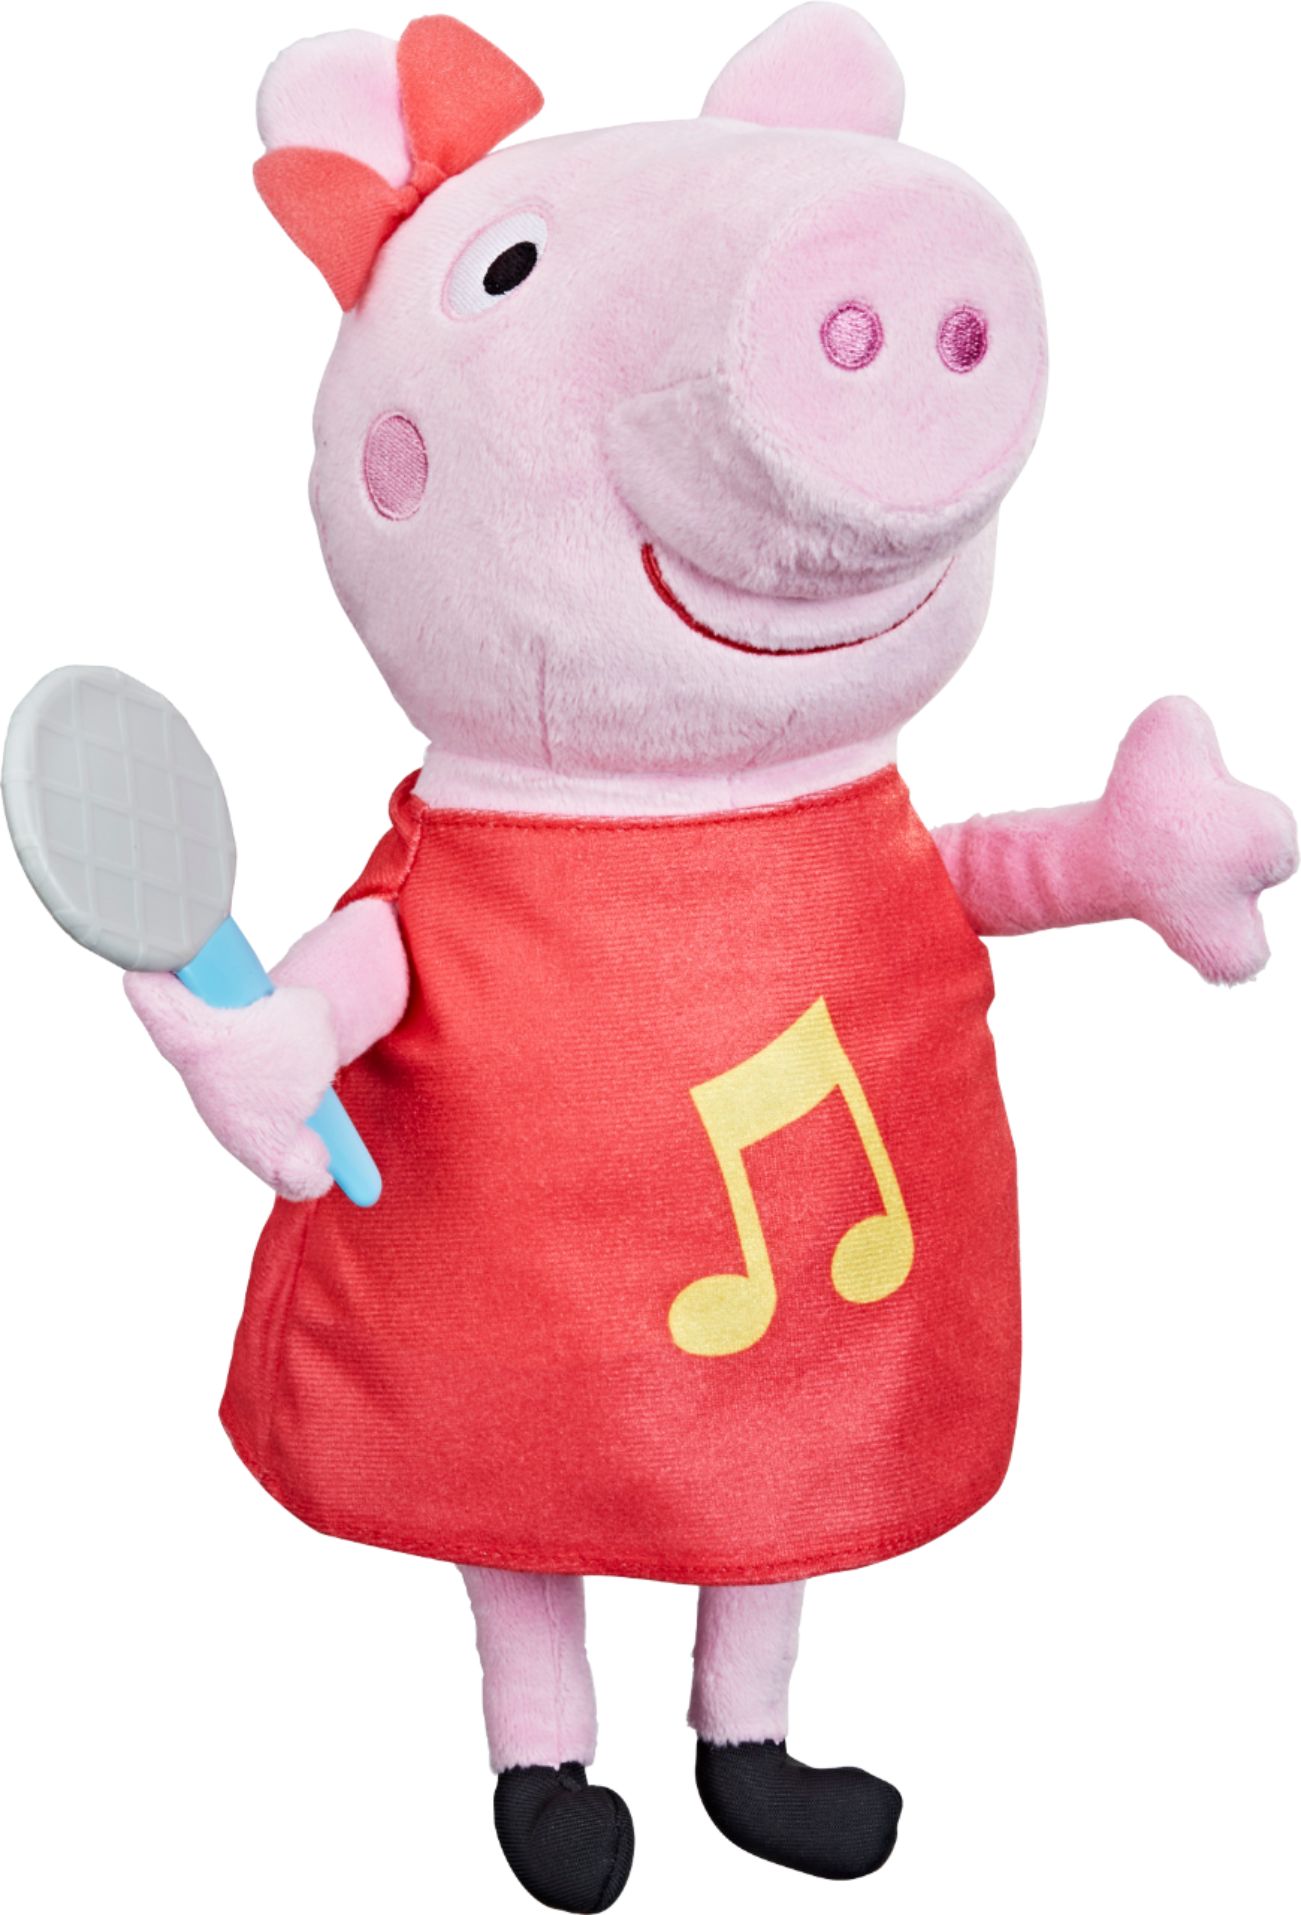 Peppa Pig Toys for sale in Clarkston, Michigan